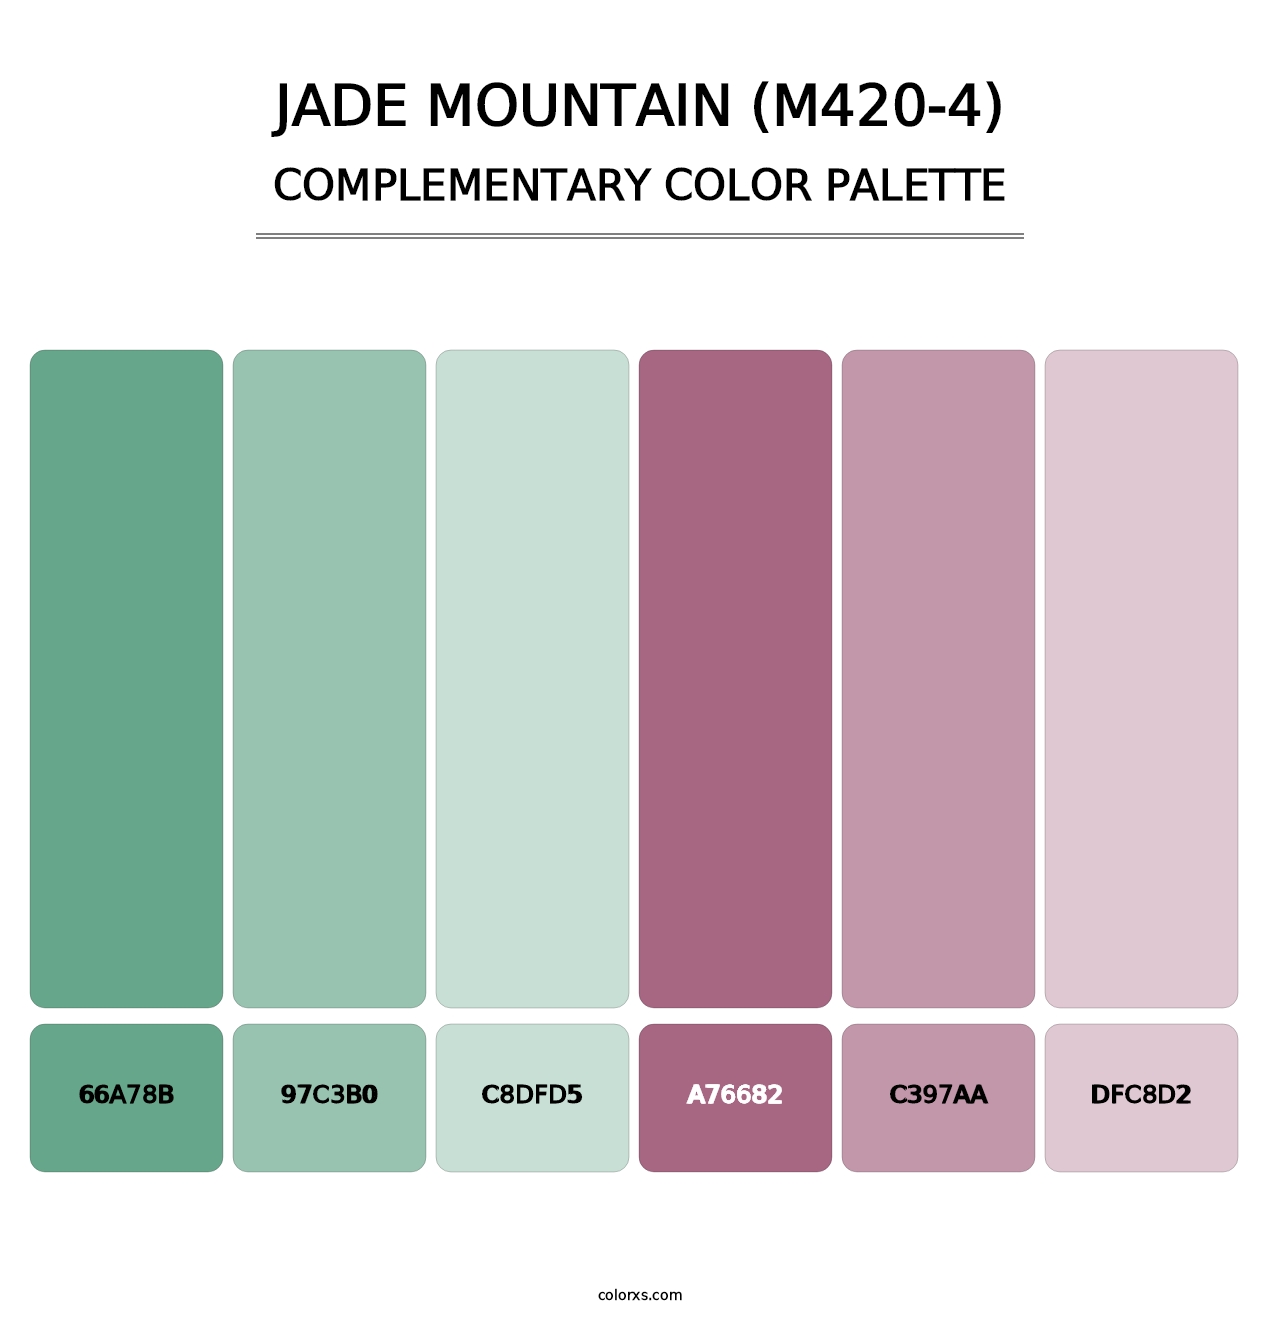 Jade Mountain (M420-4) - Complementary Color Palette